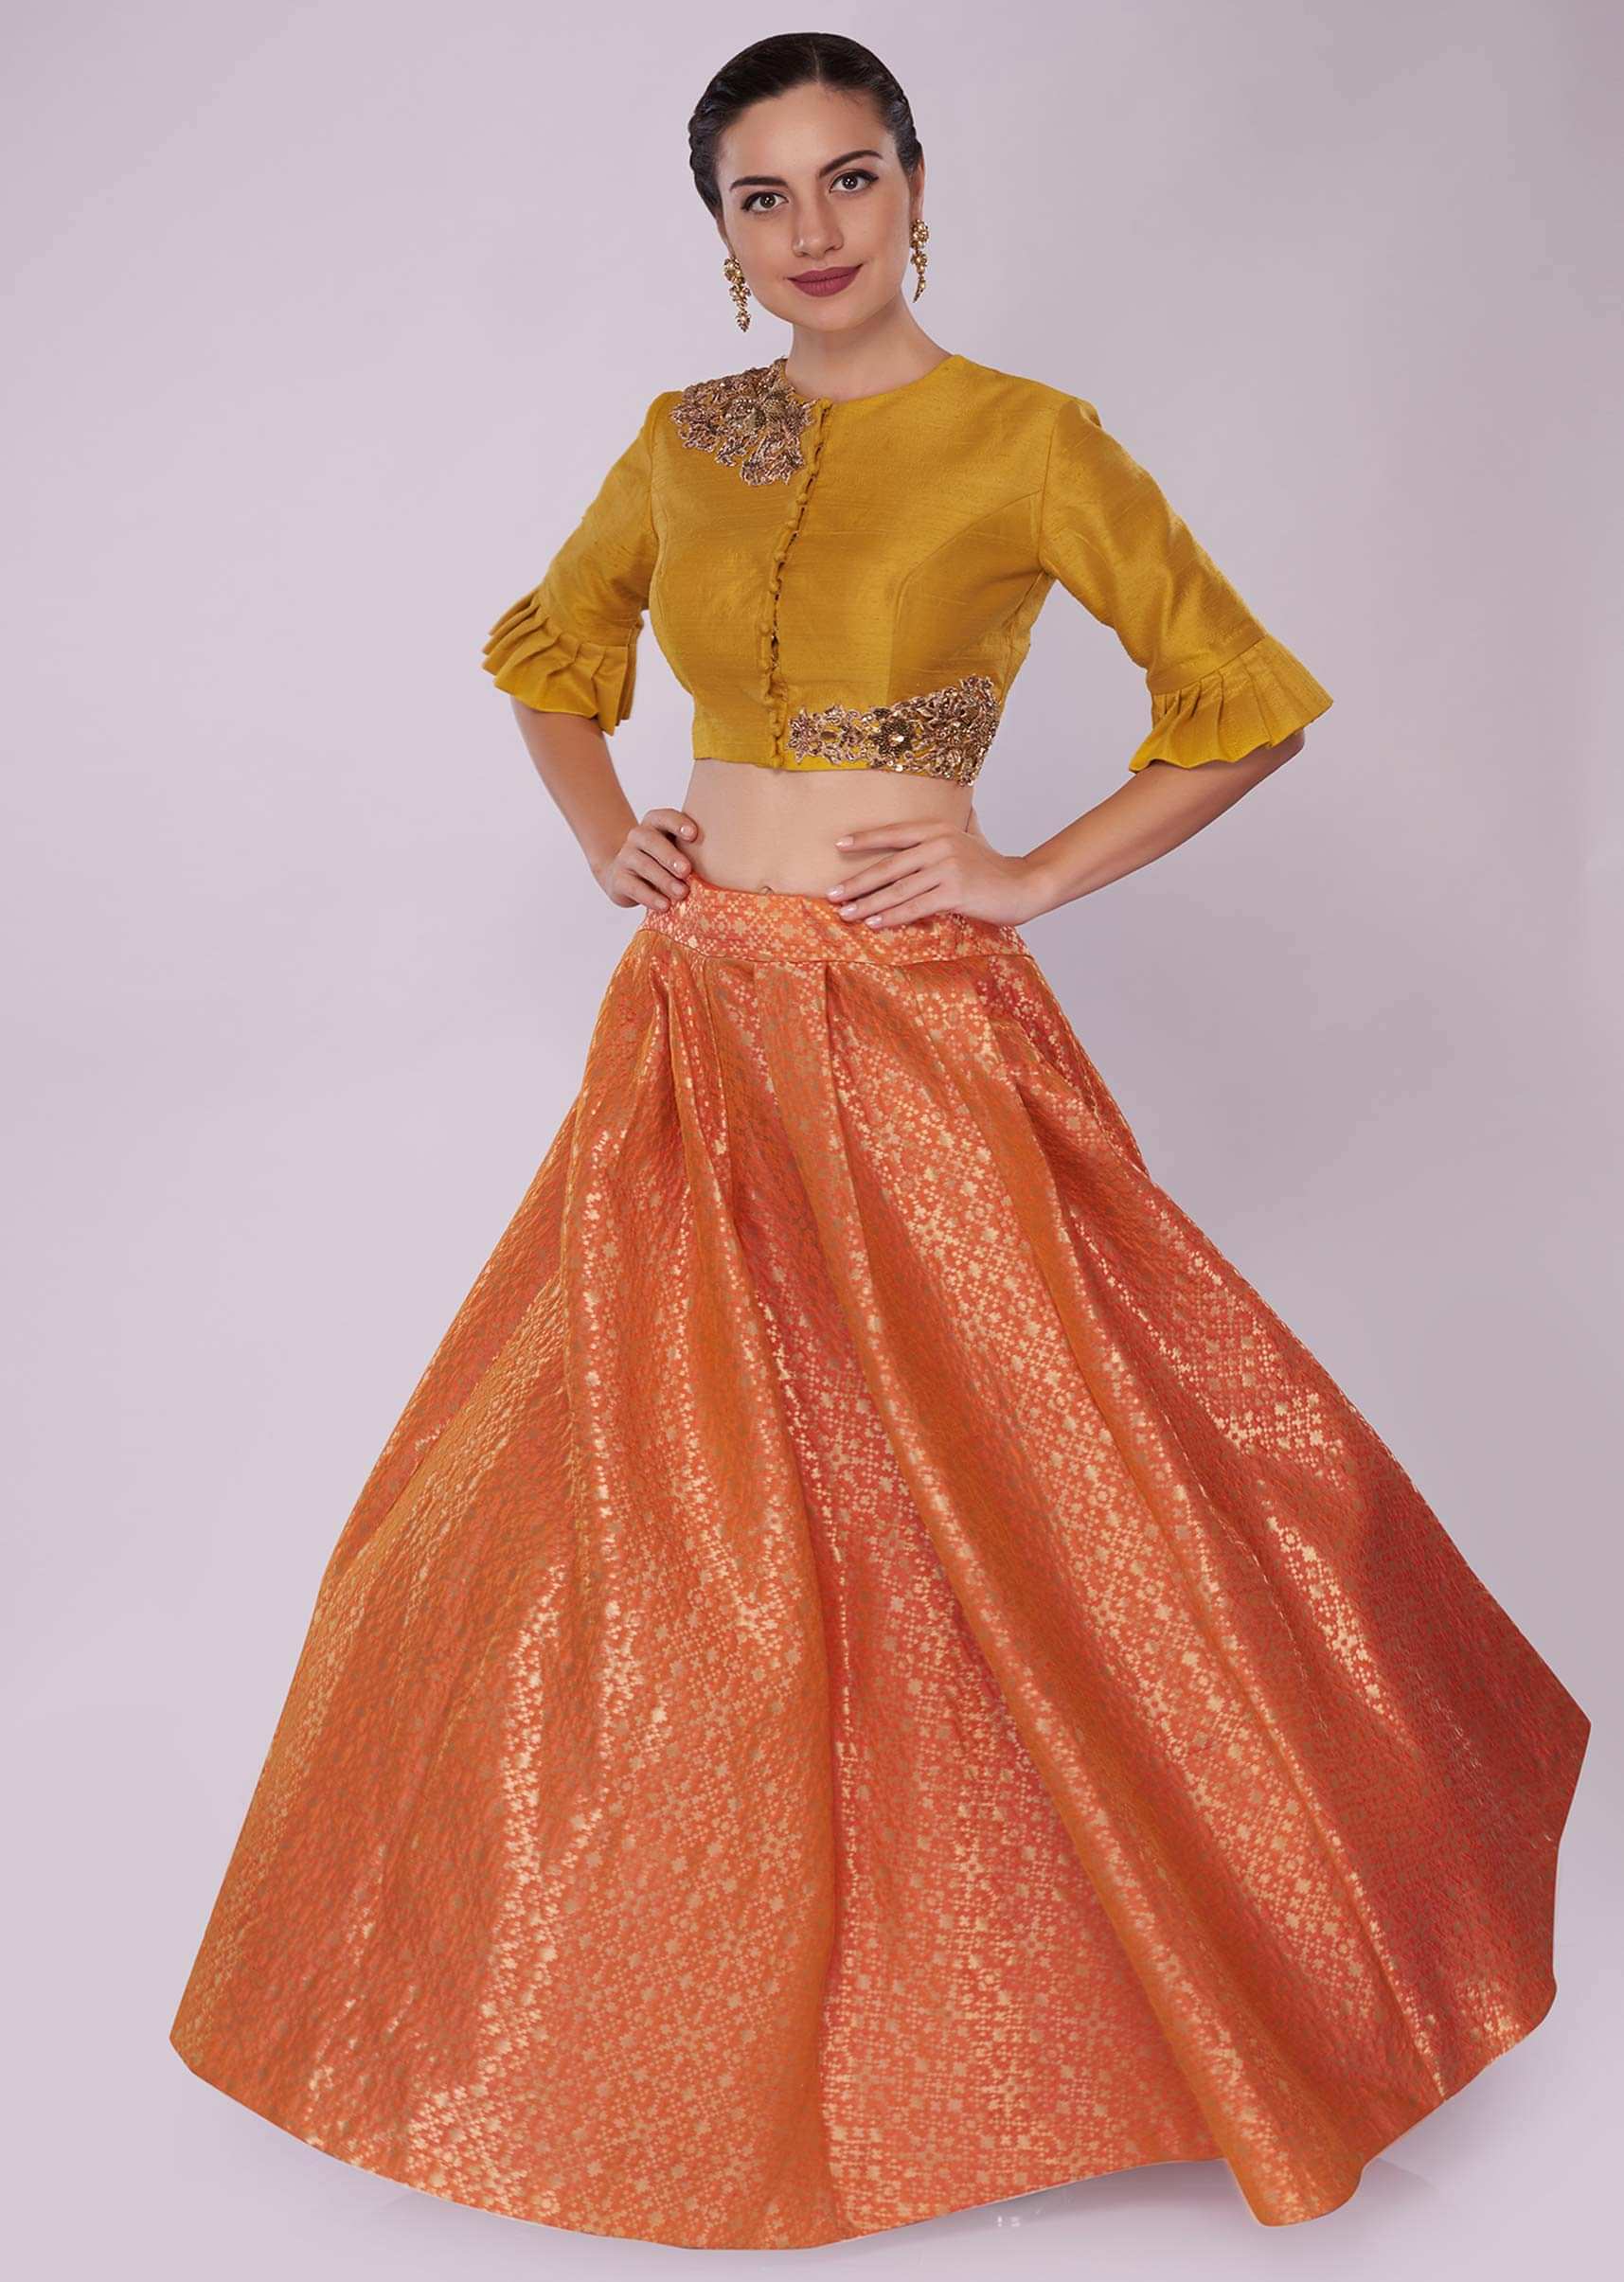 Orange brocade skirt  paired with a chrome yellow raw silk crop top